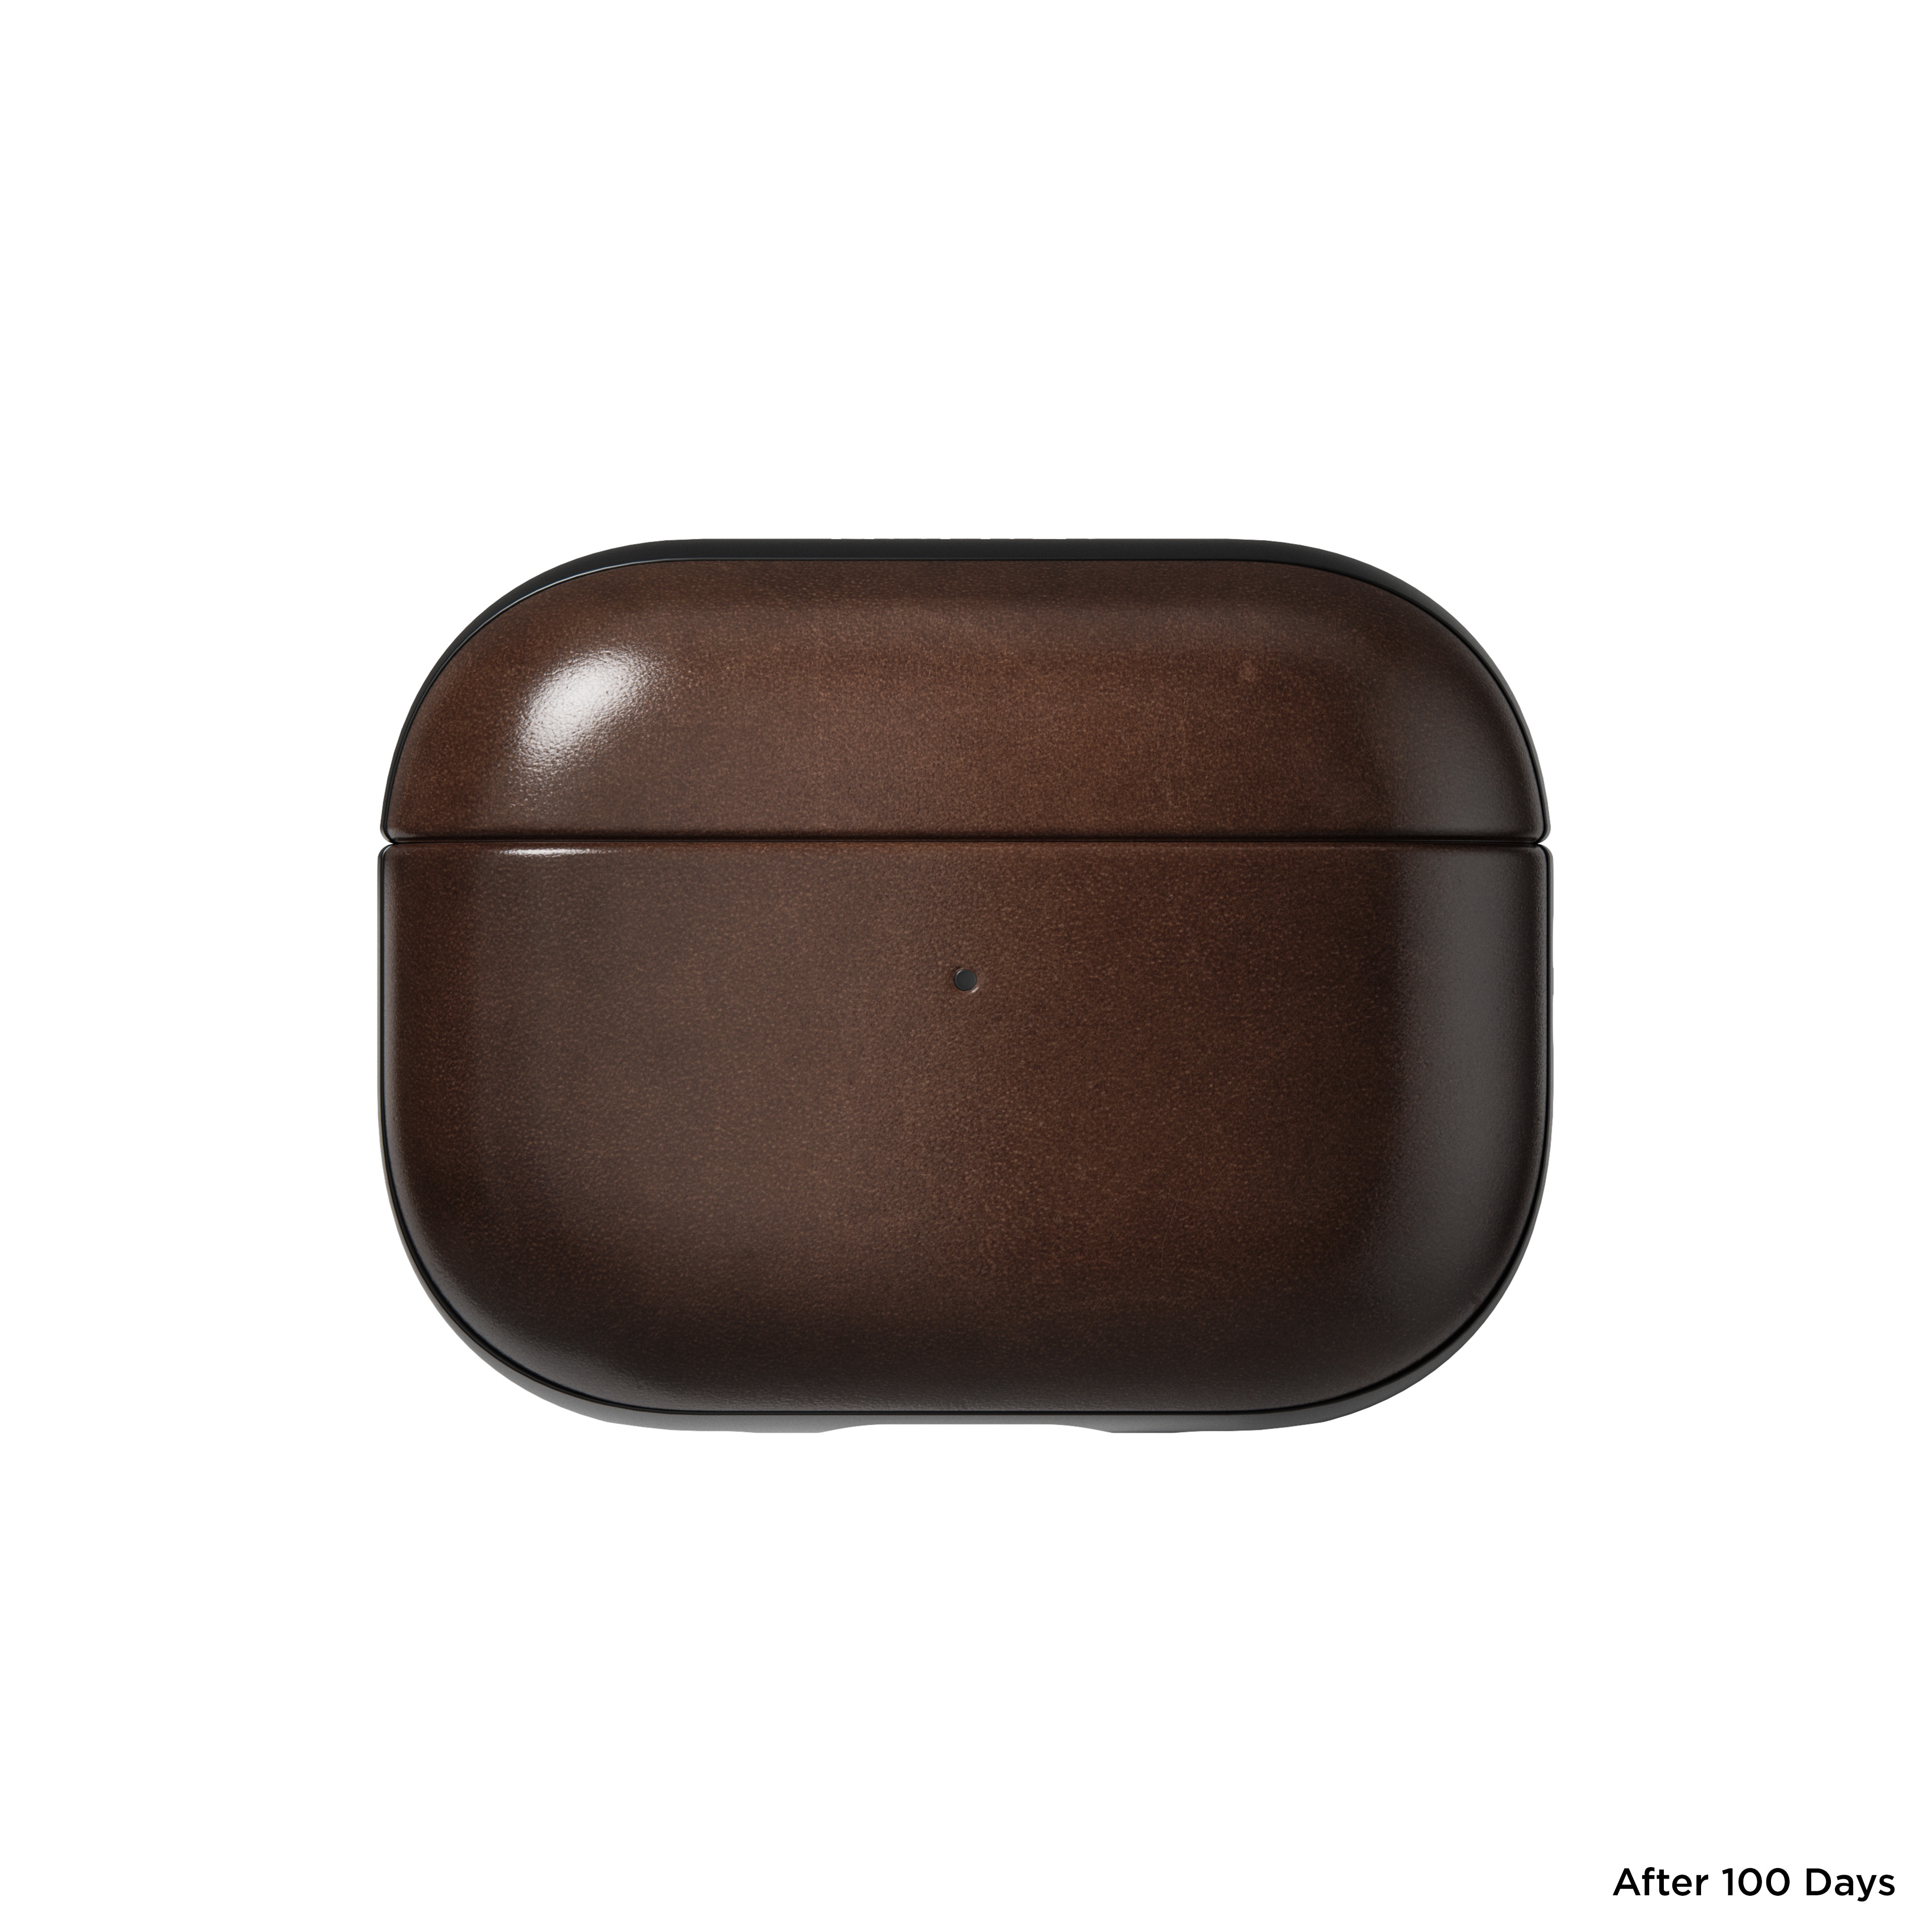 AirPods Pro 2 Modern Case Horween Leather Rustic Brown